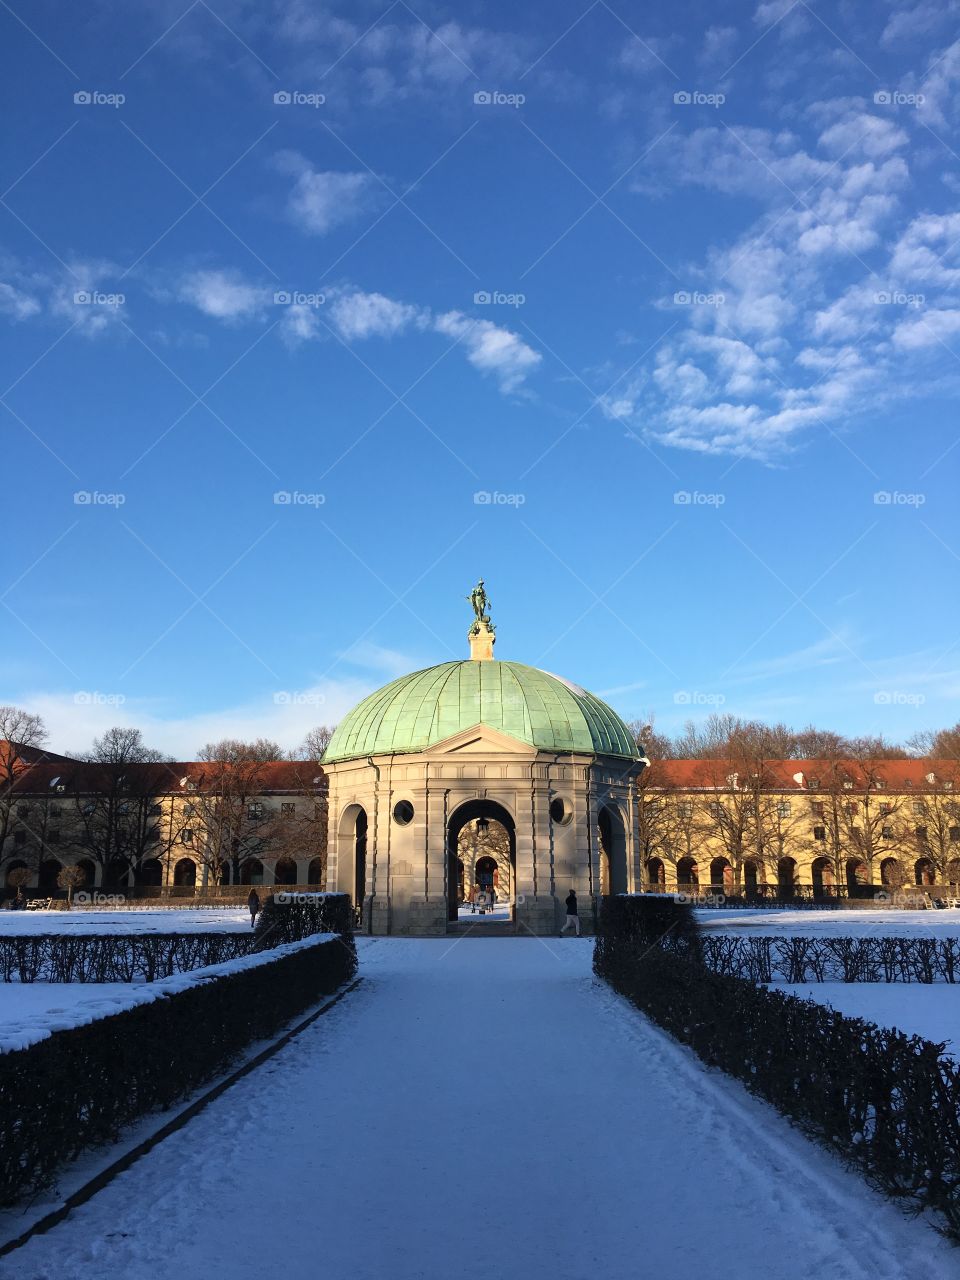 The Colonnade, a central structure in Munich’s Hofgarten, on a snowy afternoon in winter.  